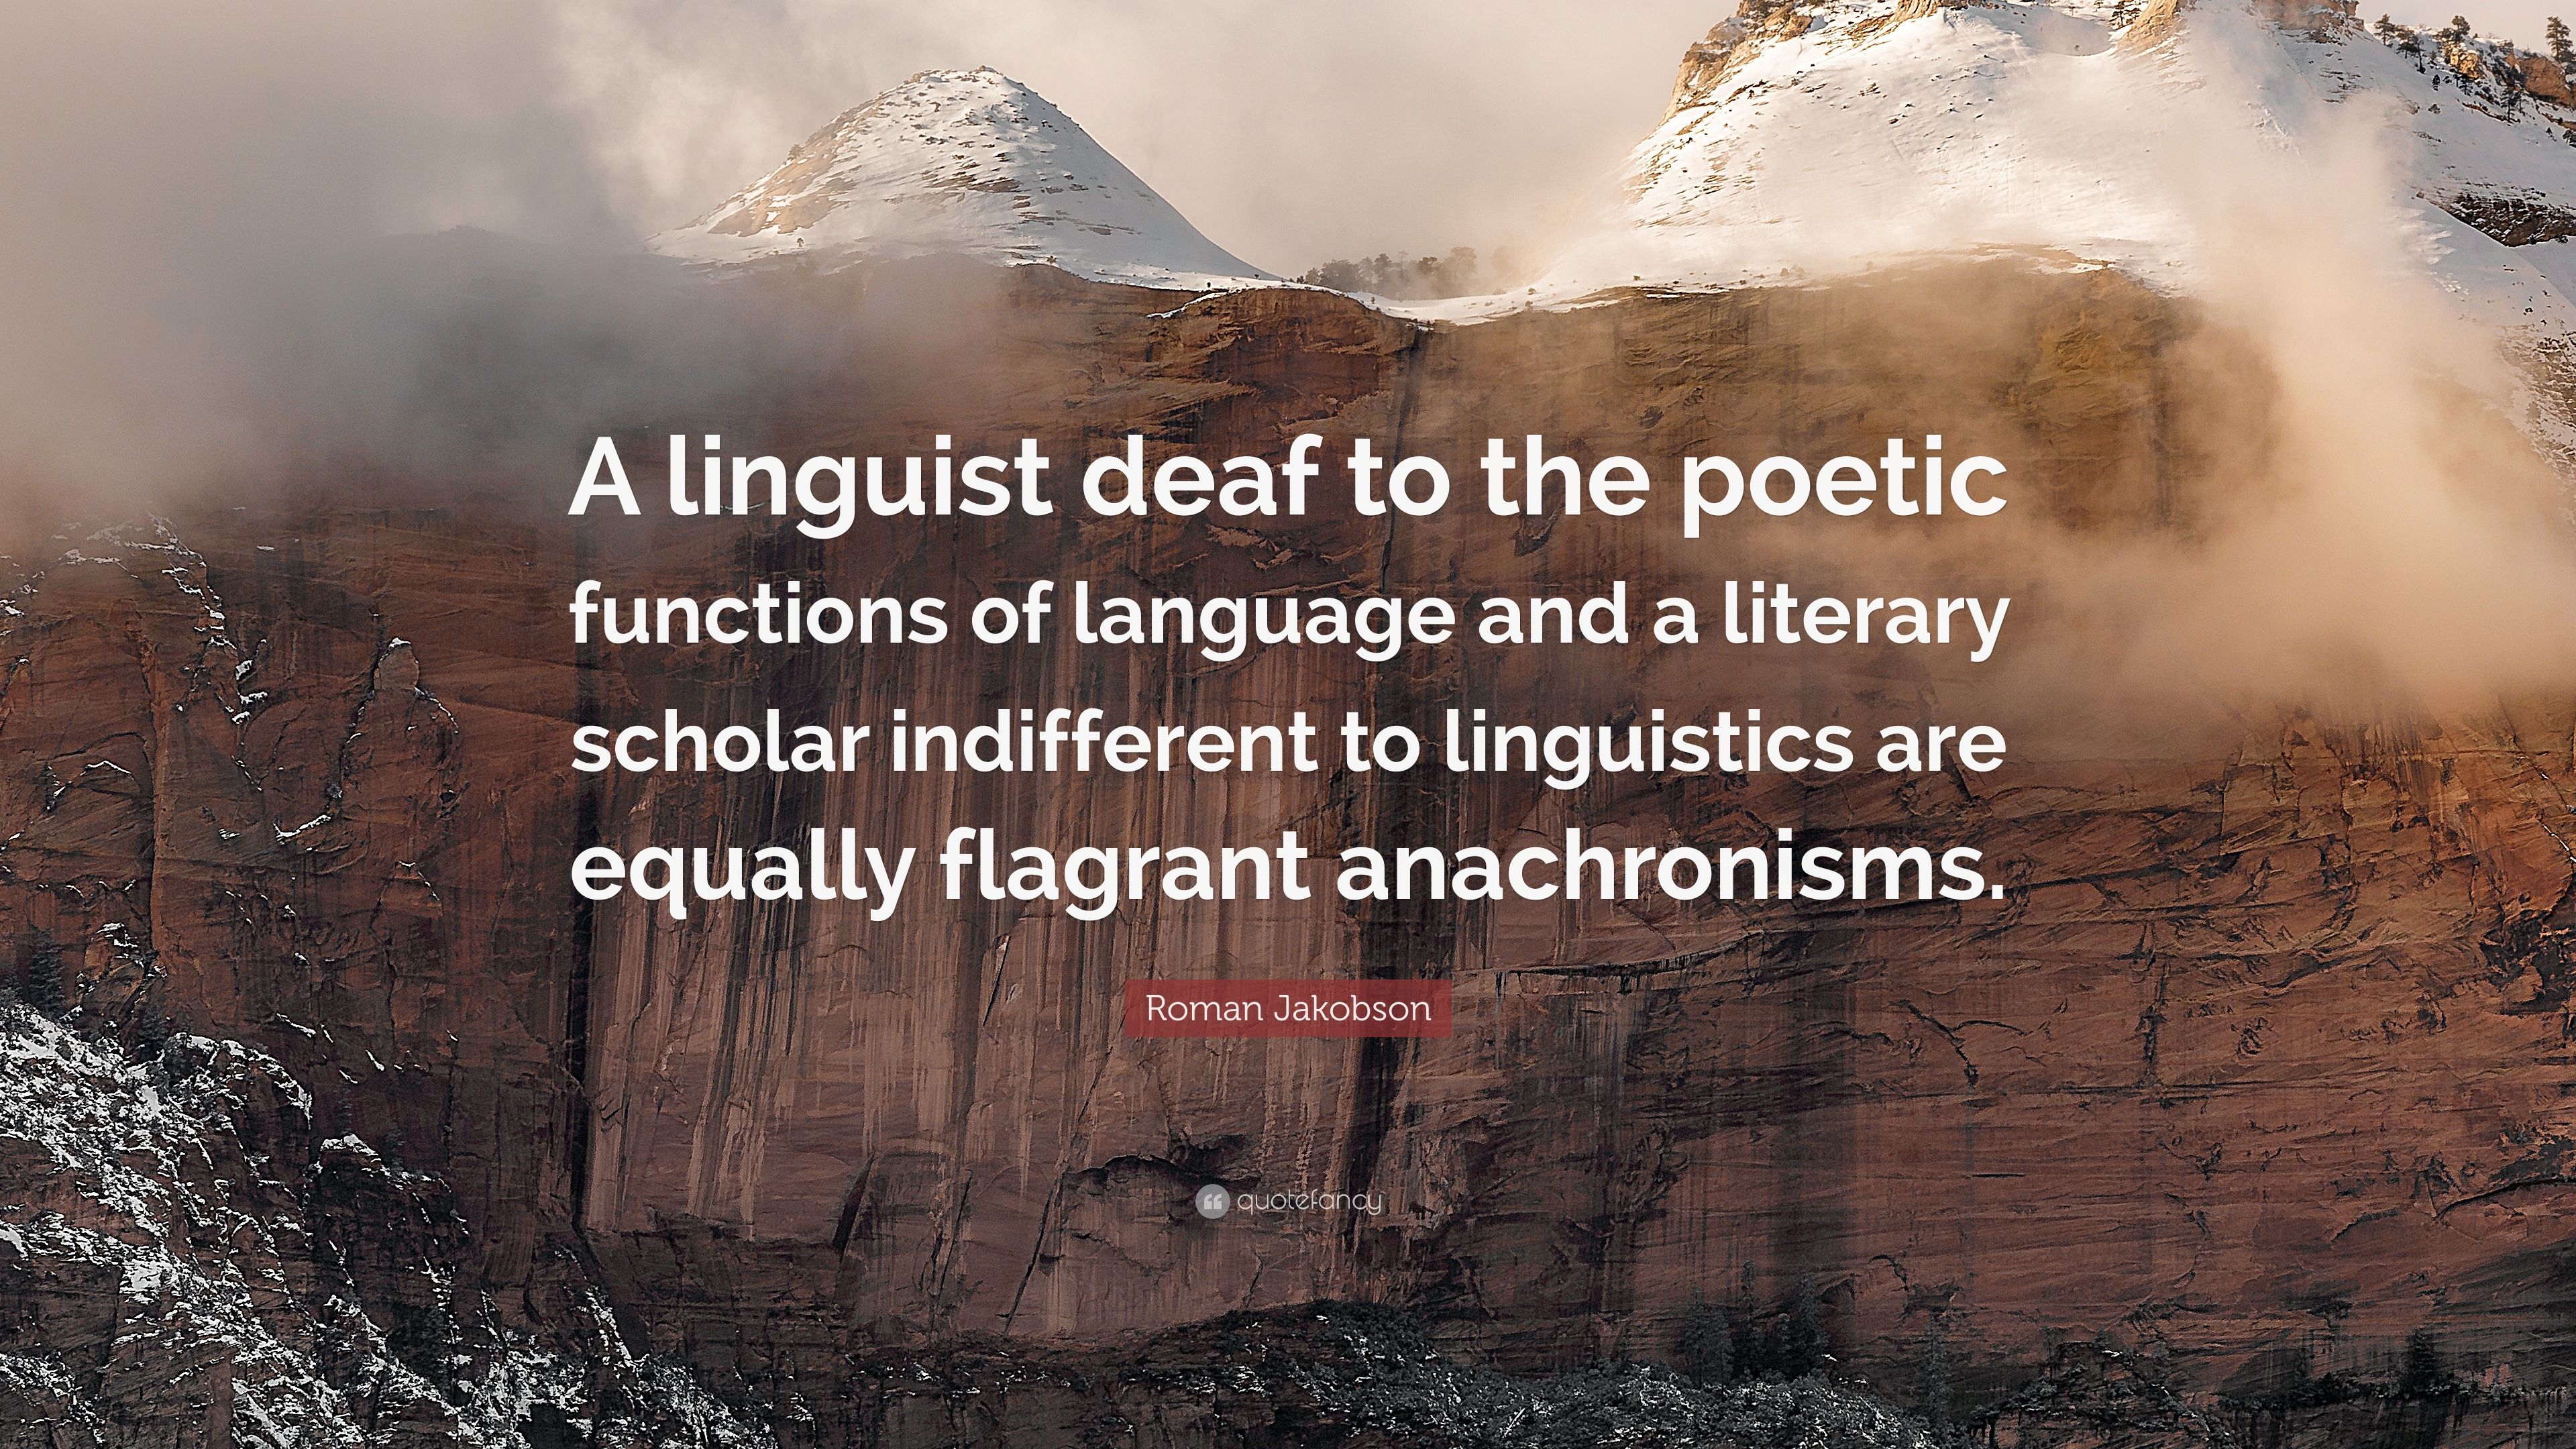 Roman Jakobson Quote: “A linguist deaf to the poetic functions of language and a literary scholar indifferent to linguistics are equally flagra.”